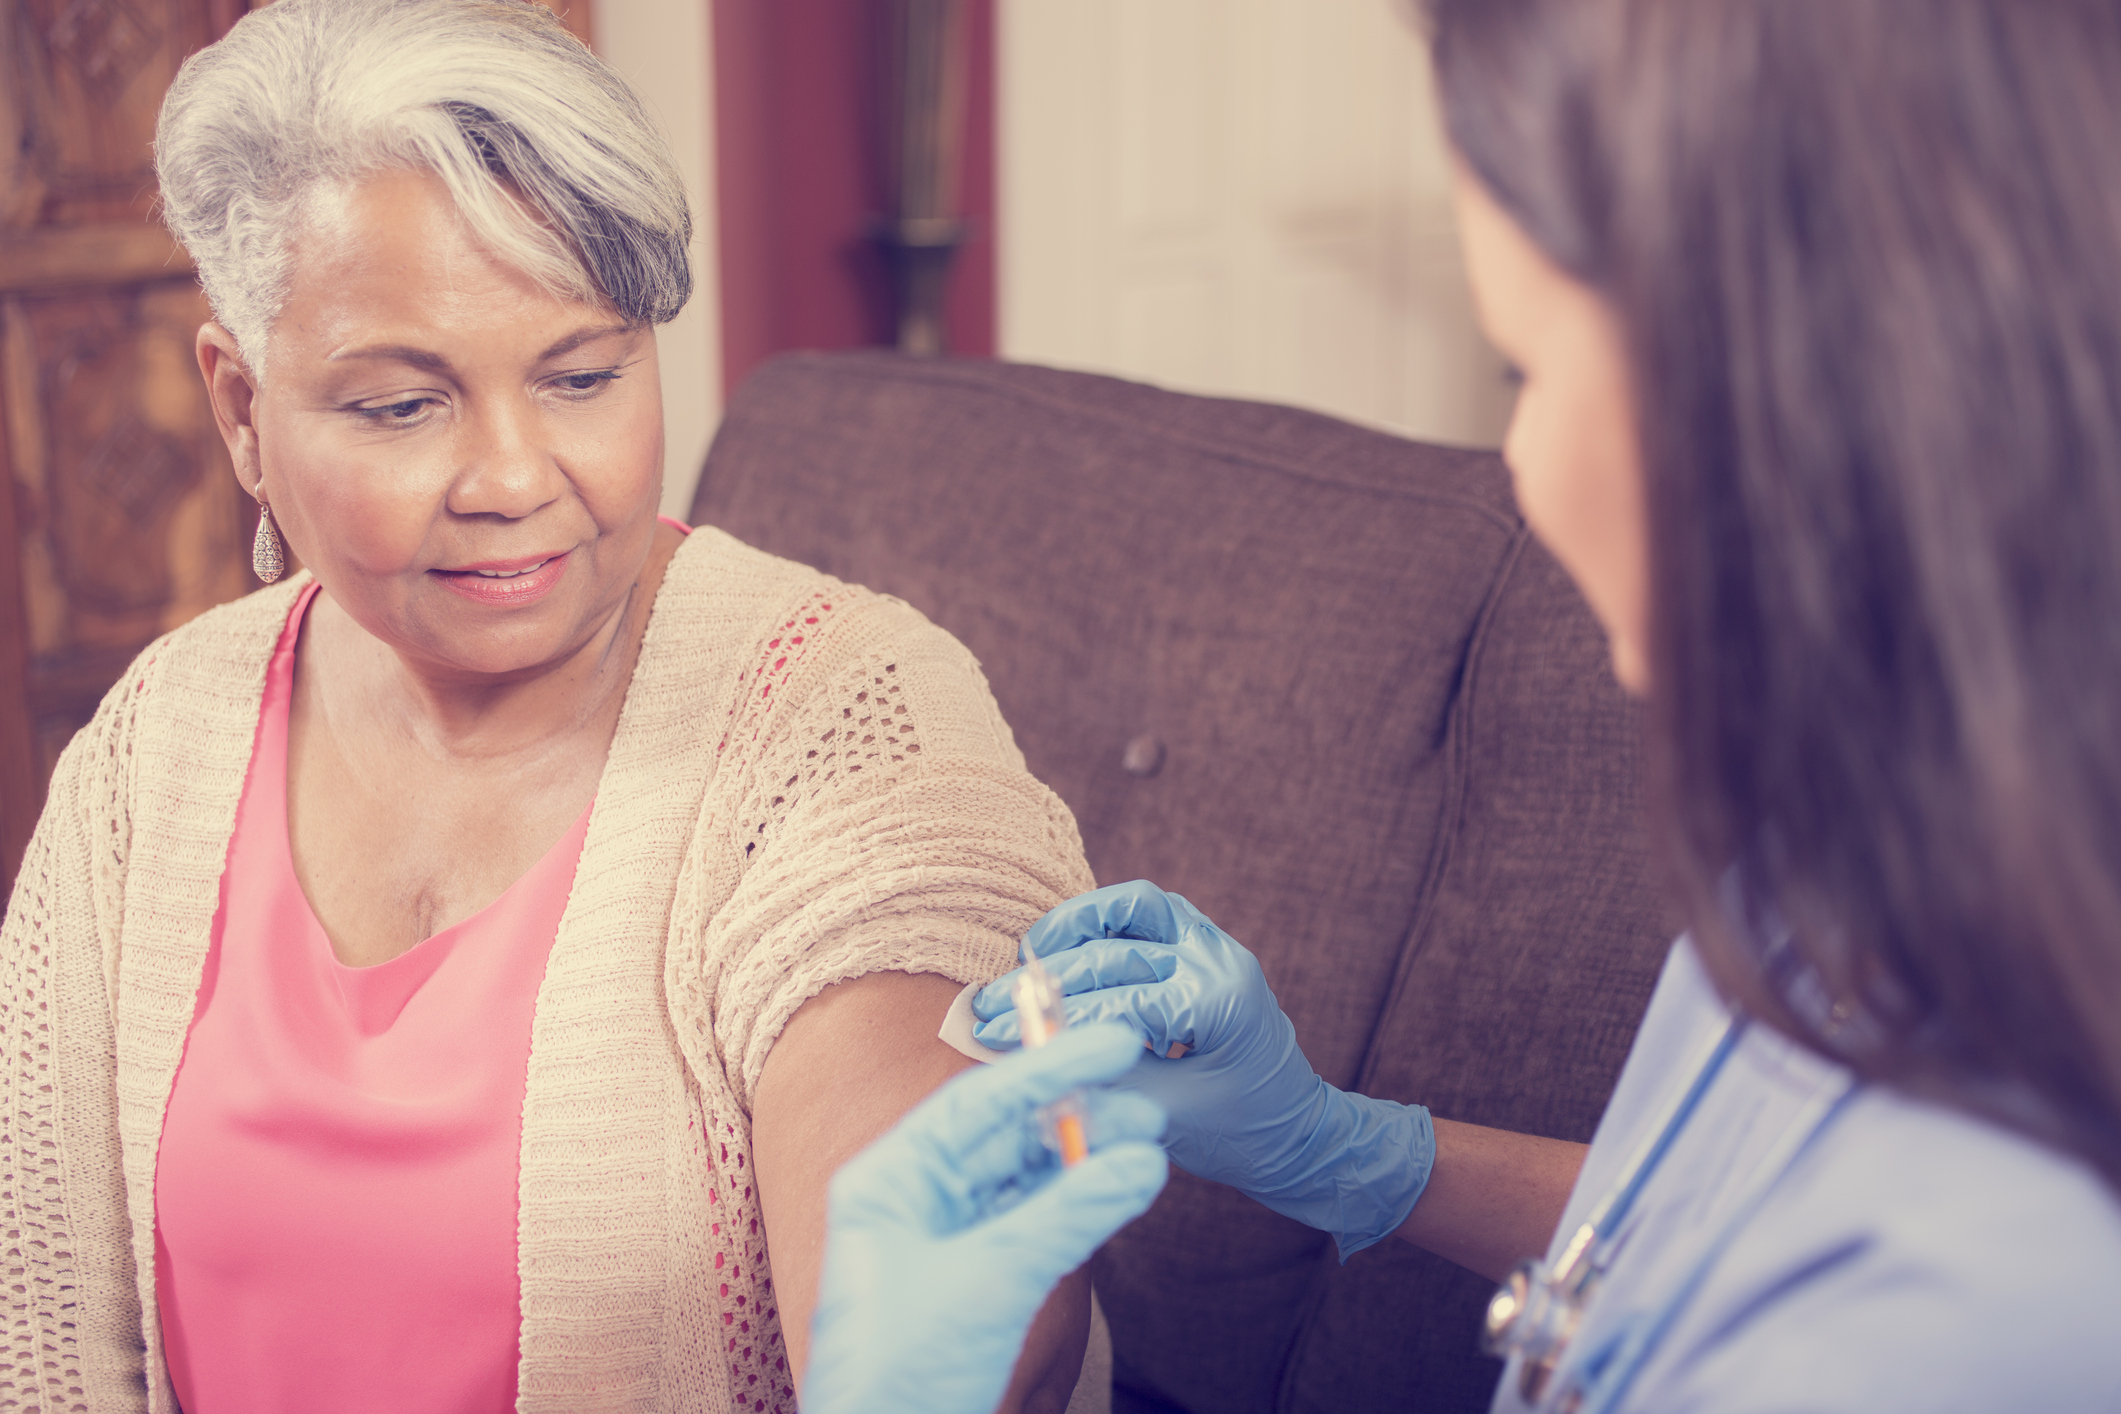 Home healthcare nurse giving injection to senior adult woman.